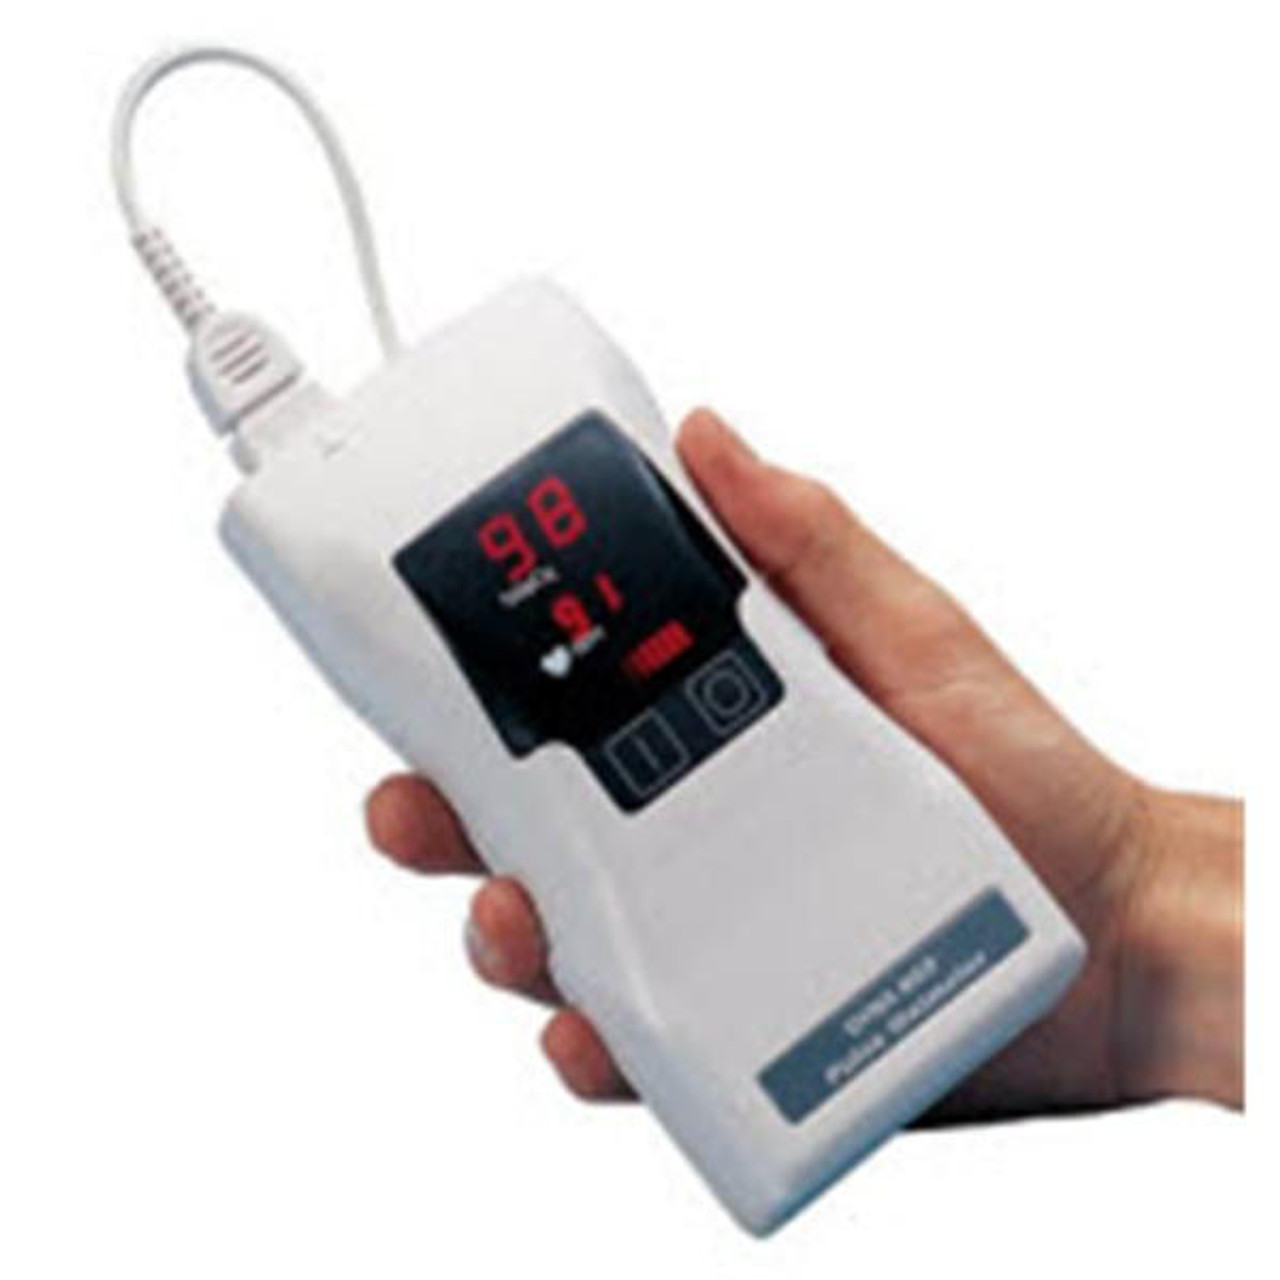 Close Up Handheld Pulse Oximeter Medical Instruments Used To Monitoring  Blood Oxygen in Patients in Emergency Room in Hospital. Stock Image - Image  of watch, blood: 203846429